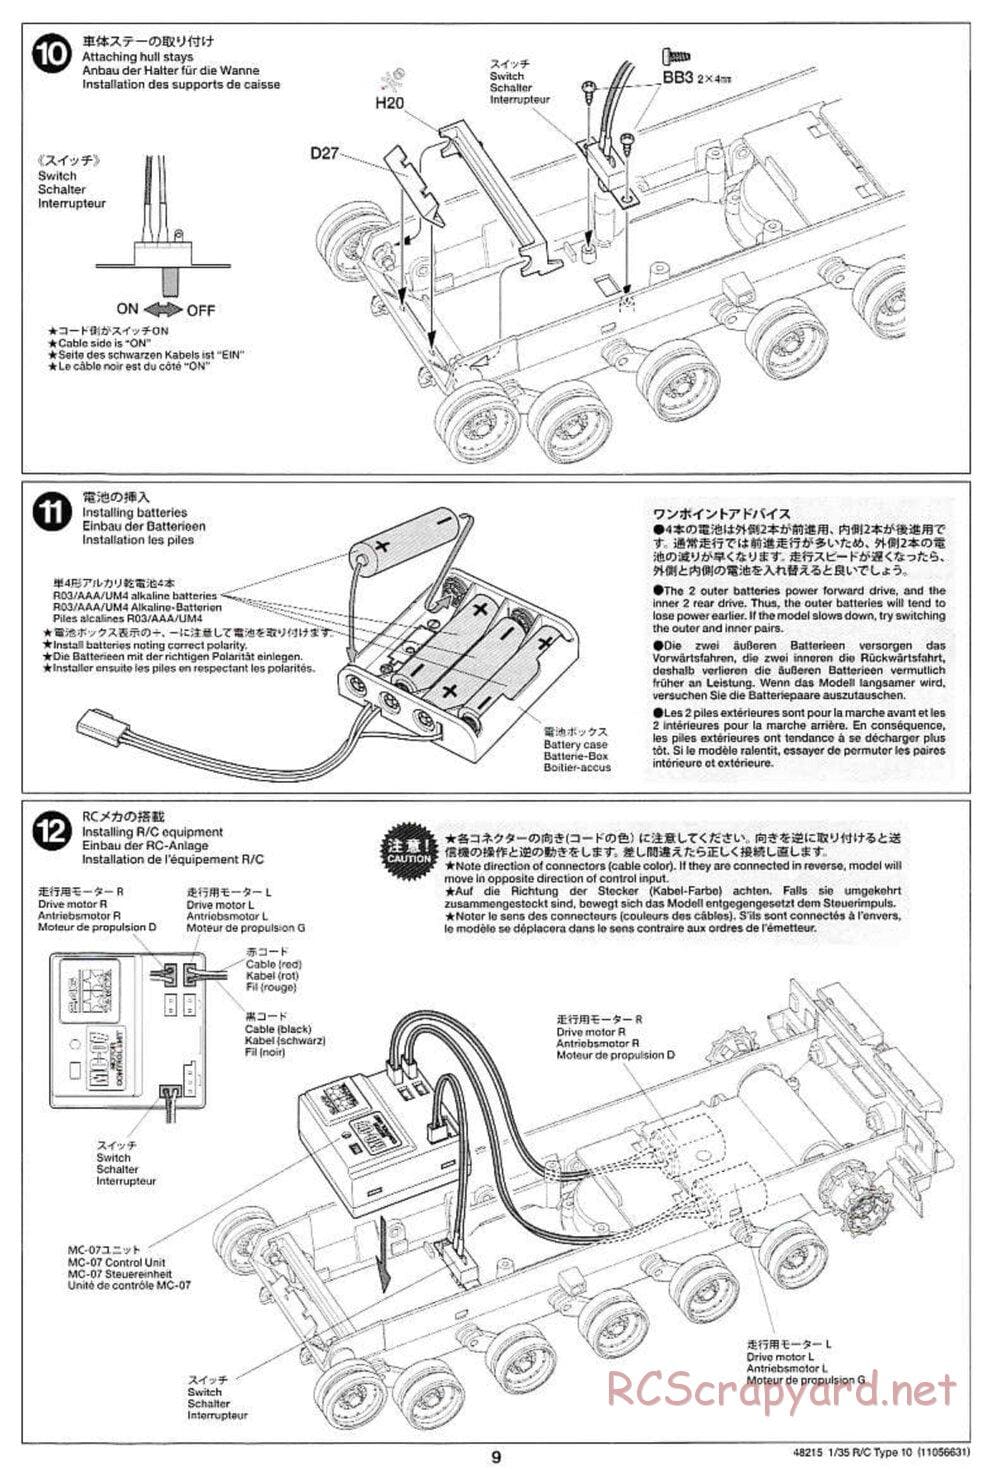 Tamiya - JGSDF Type 10 Tank - 1/35 Scale Chassis - Manual - Page 9